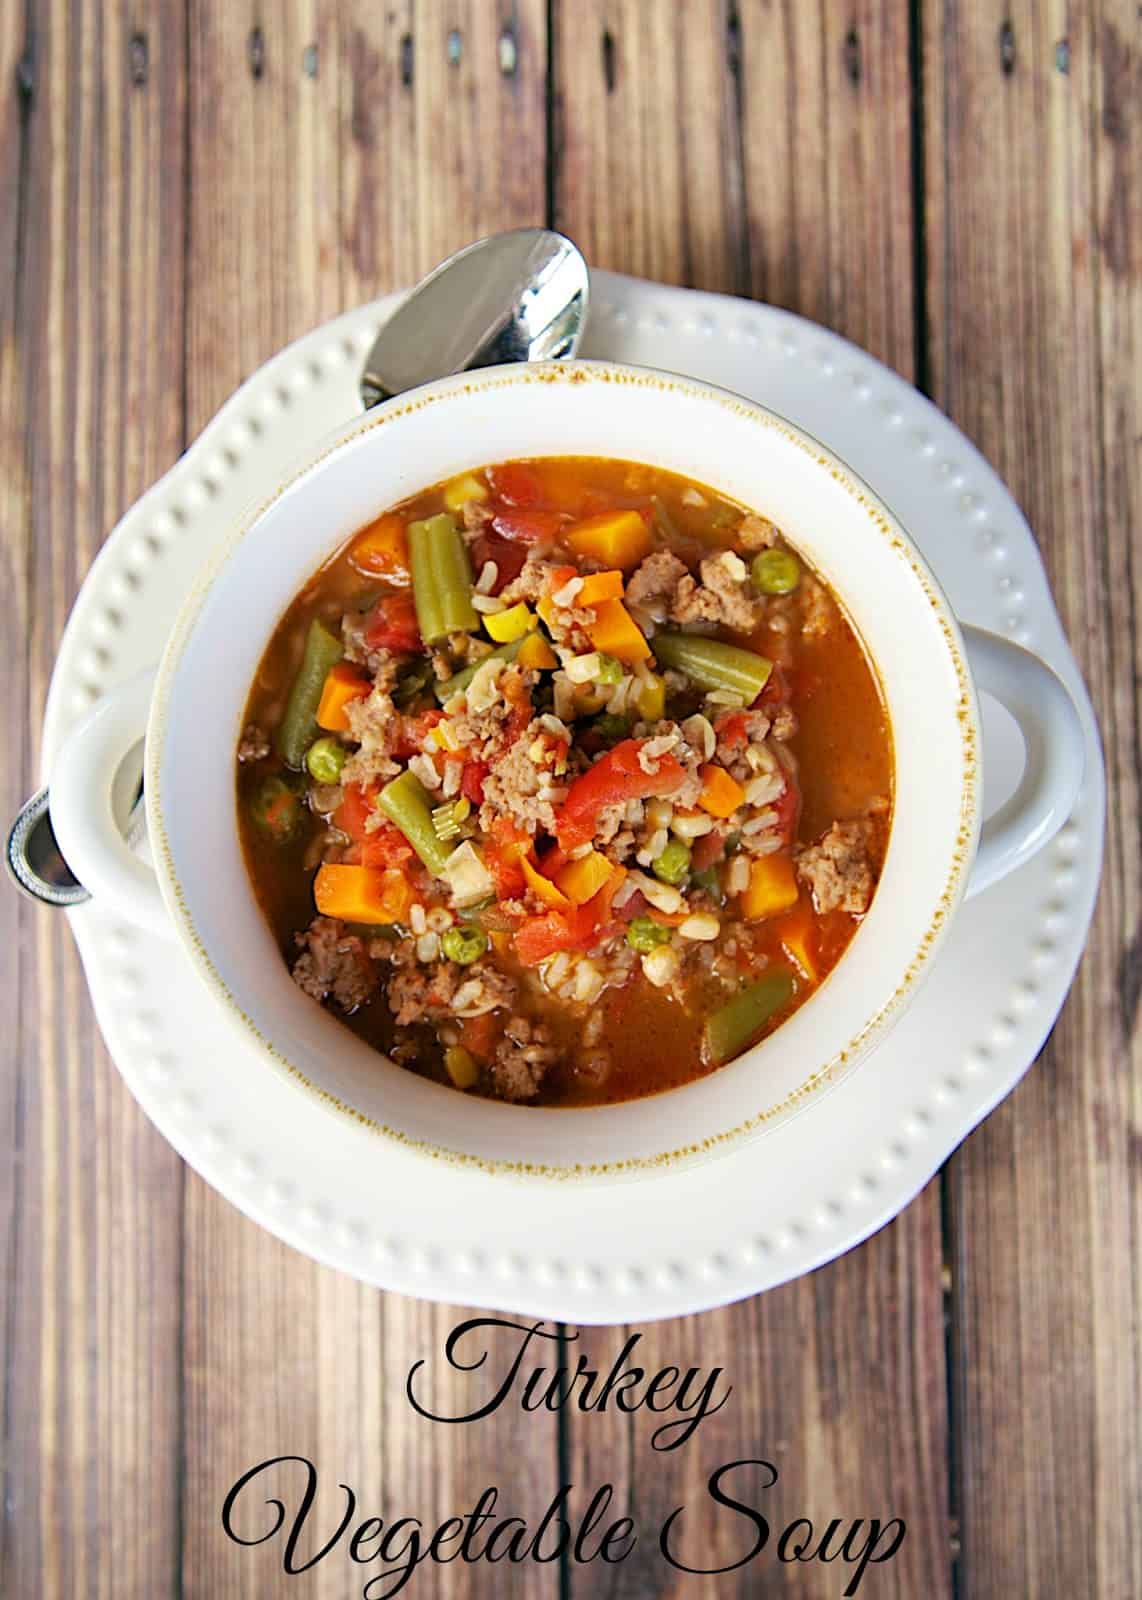 Turkey Vegetable Soup - ground turkey, mixed vegetables, beef broth and brown rice - ready in under 30 minutes. Leftovers are great for lunch and it freezes well. My husband gobbled this up! I've already made it 3 times this month!!